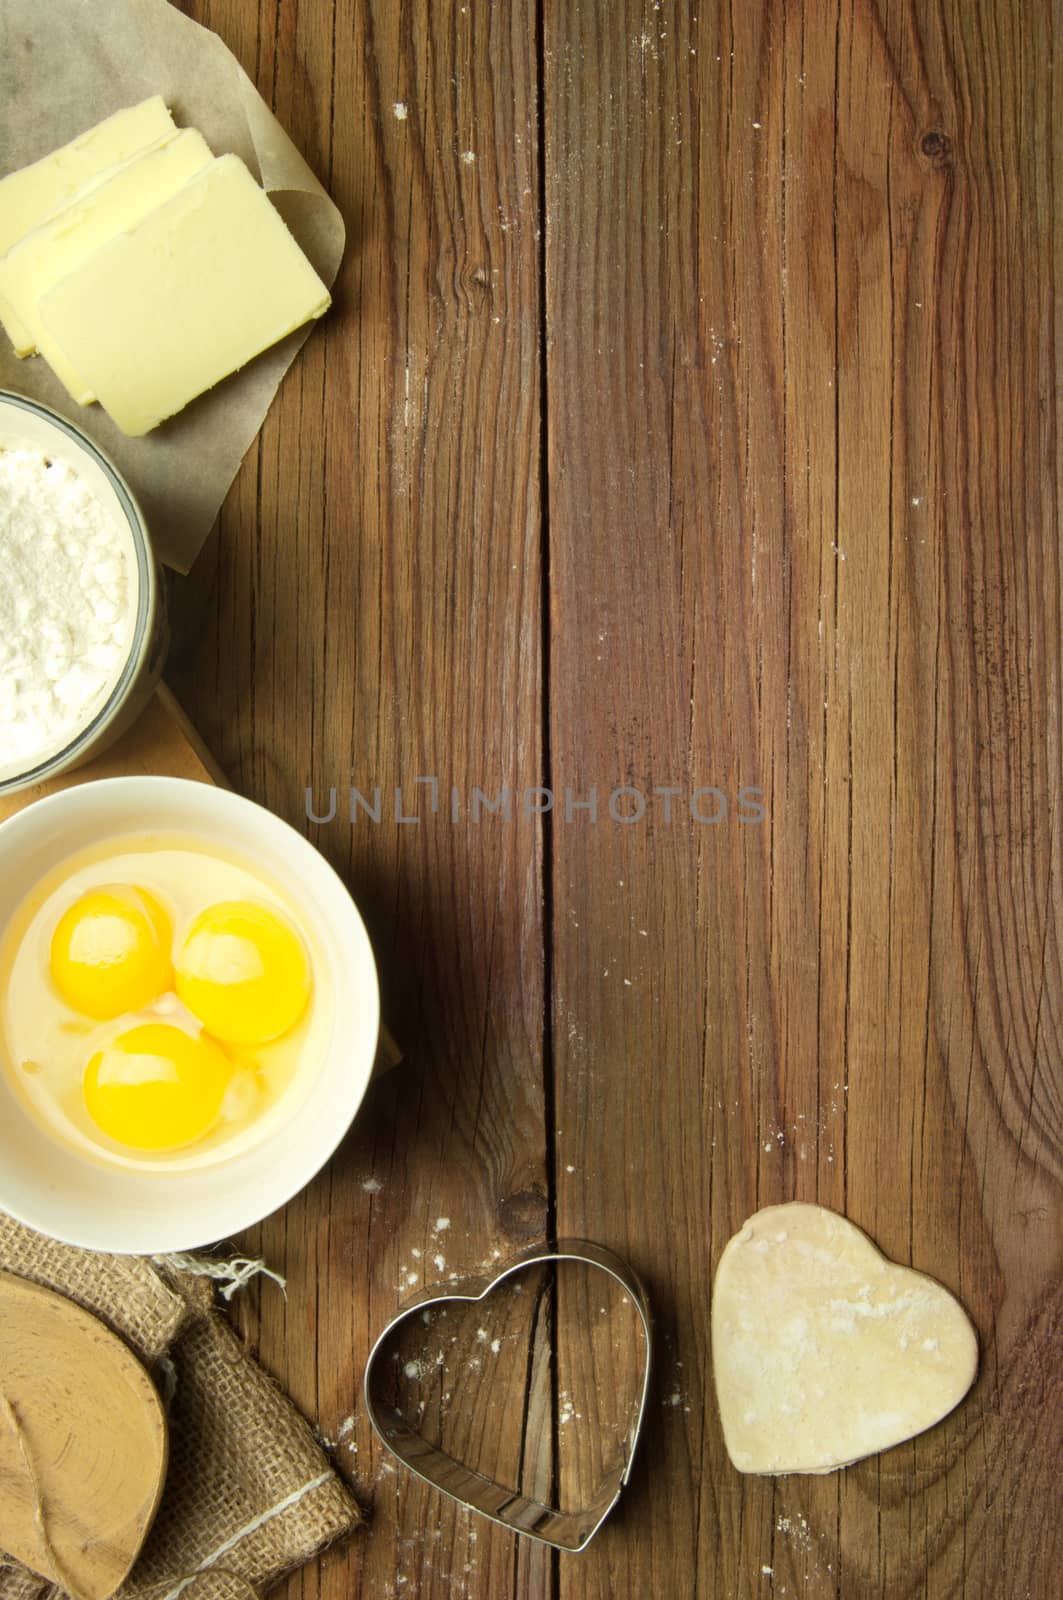 Baking preparation ingredients including eggs, flour and heart shape cookie shapers